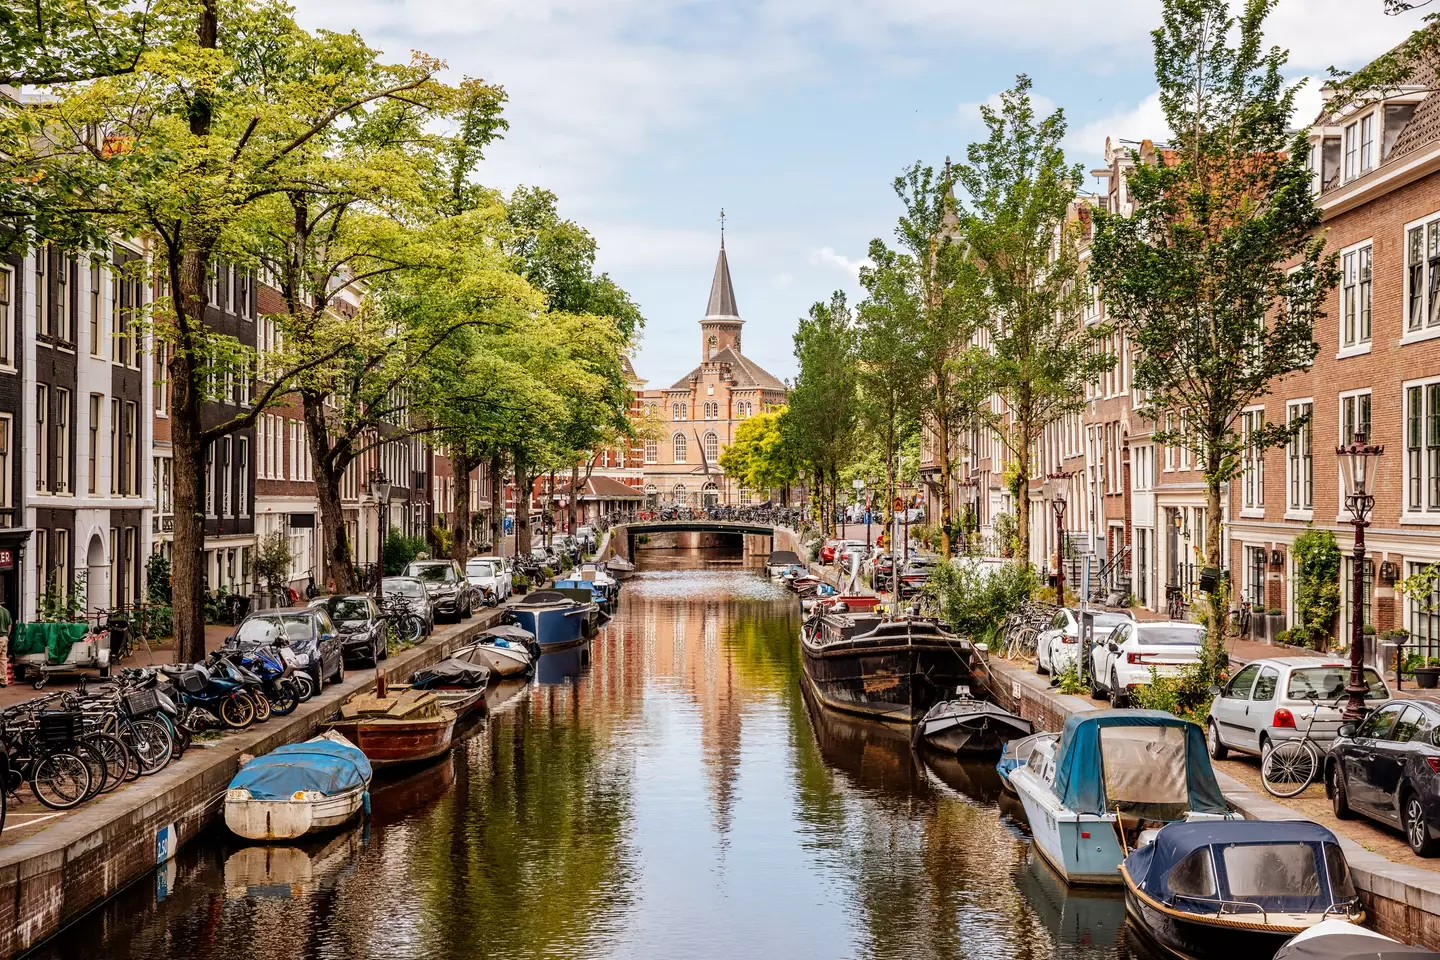 Bloemgracht canal in Amsterdam (Getty Stock Images)